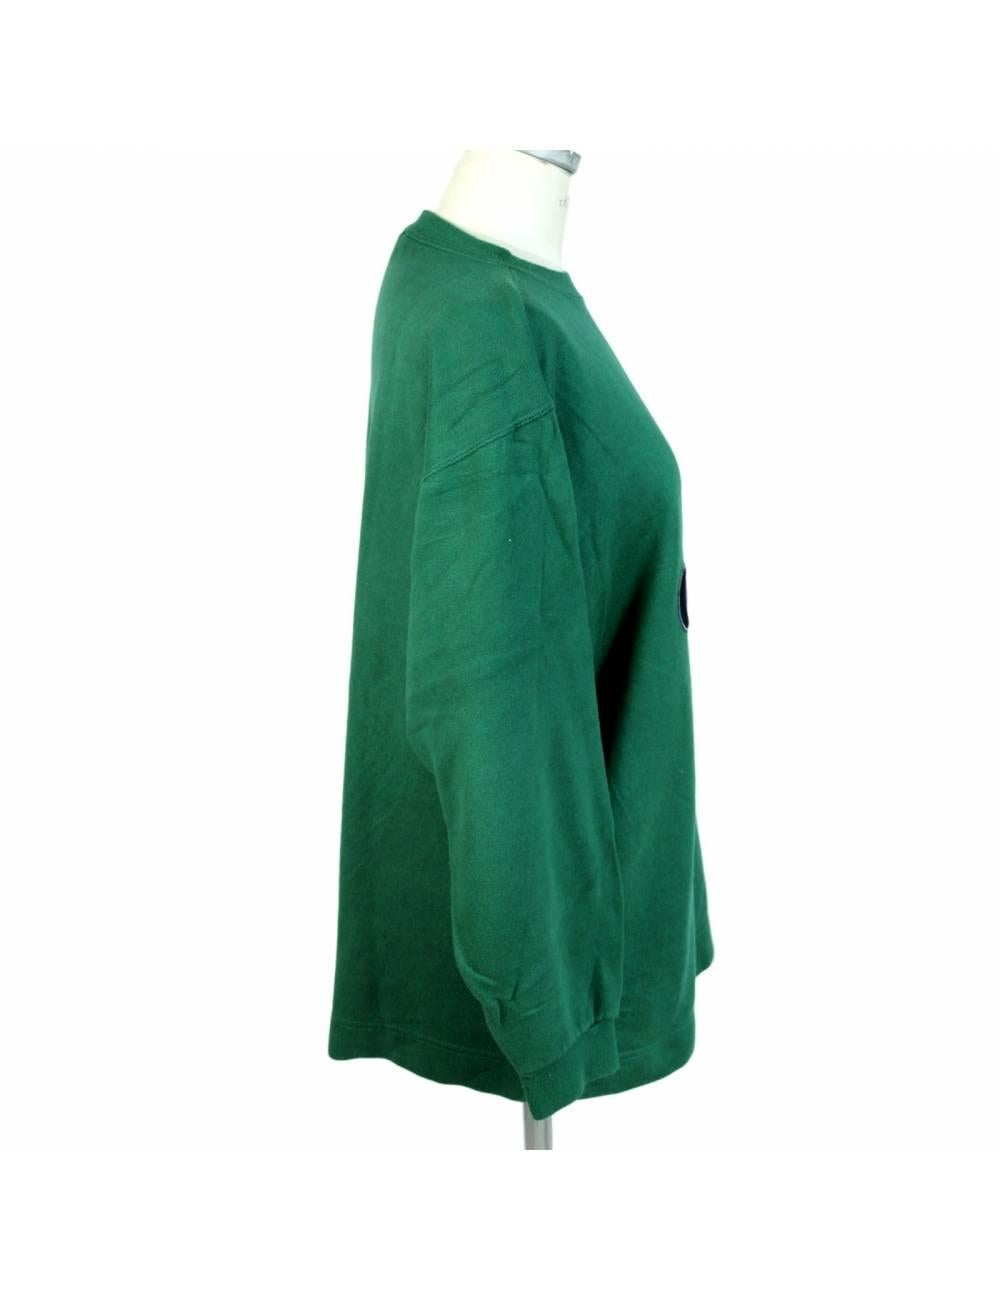 Vintage cotton sweater by Italian designer Laura Biagiotti, golf collection.

The green sweater has a print on the chest with the word 